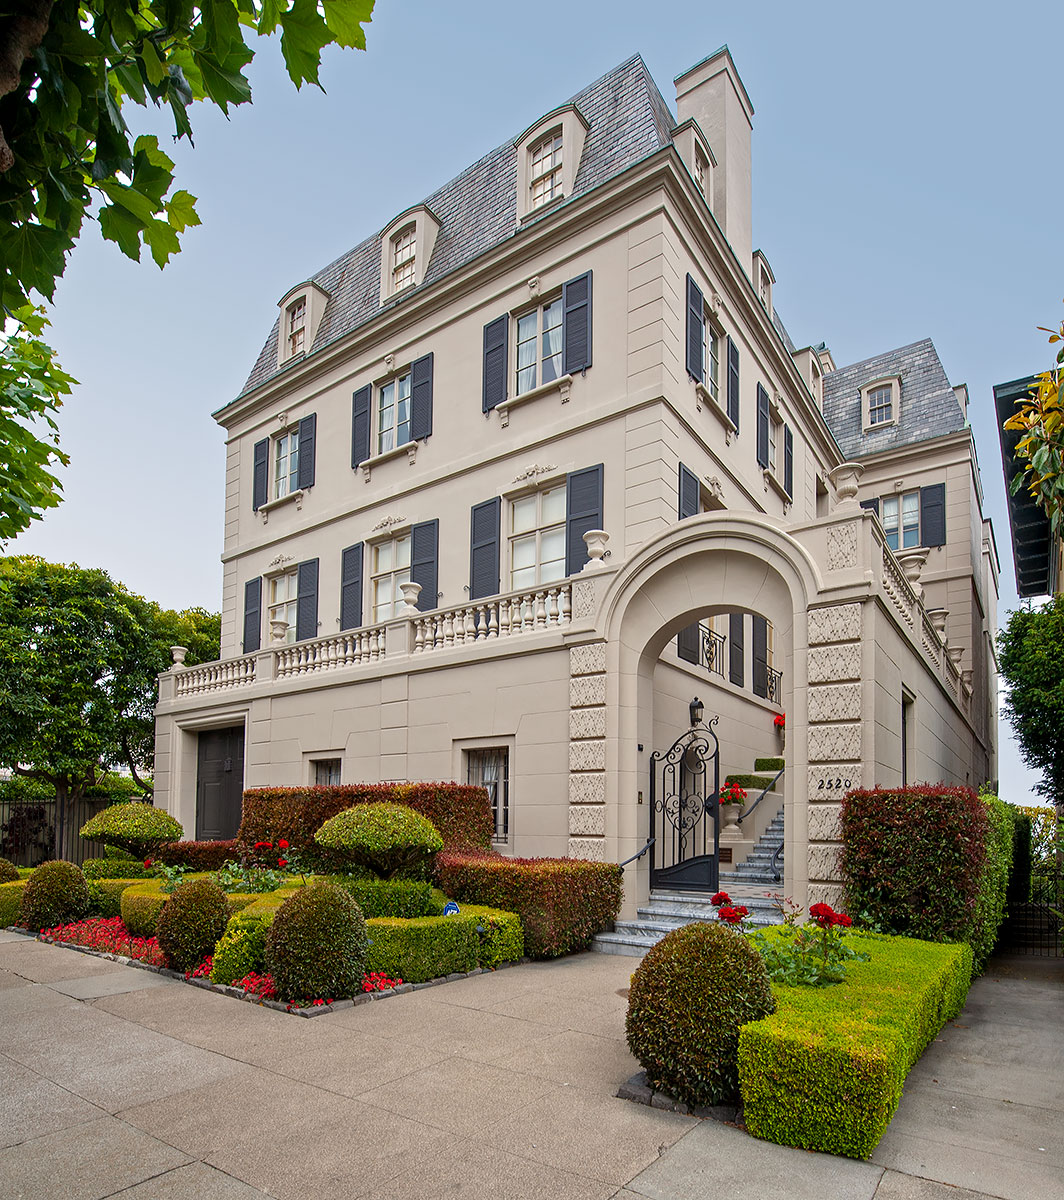 2520 Pacific Avenue in Pacific Heights, designed by Albert L. Farr, built 1916